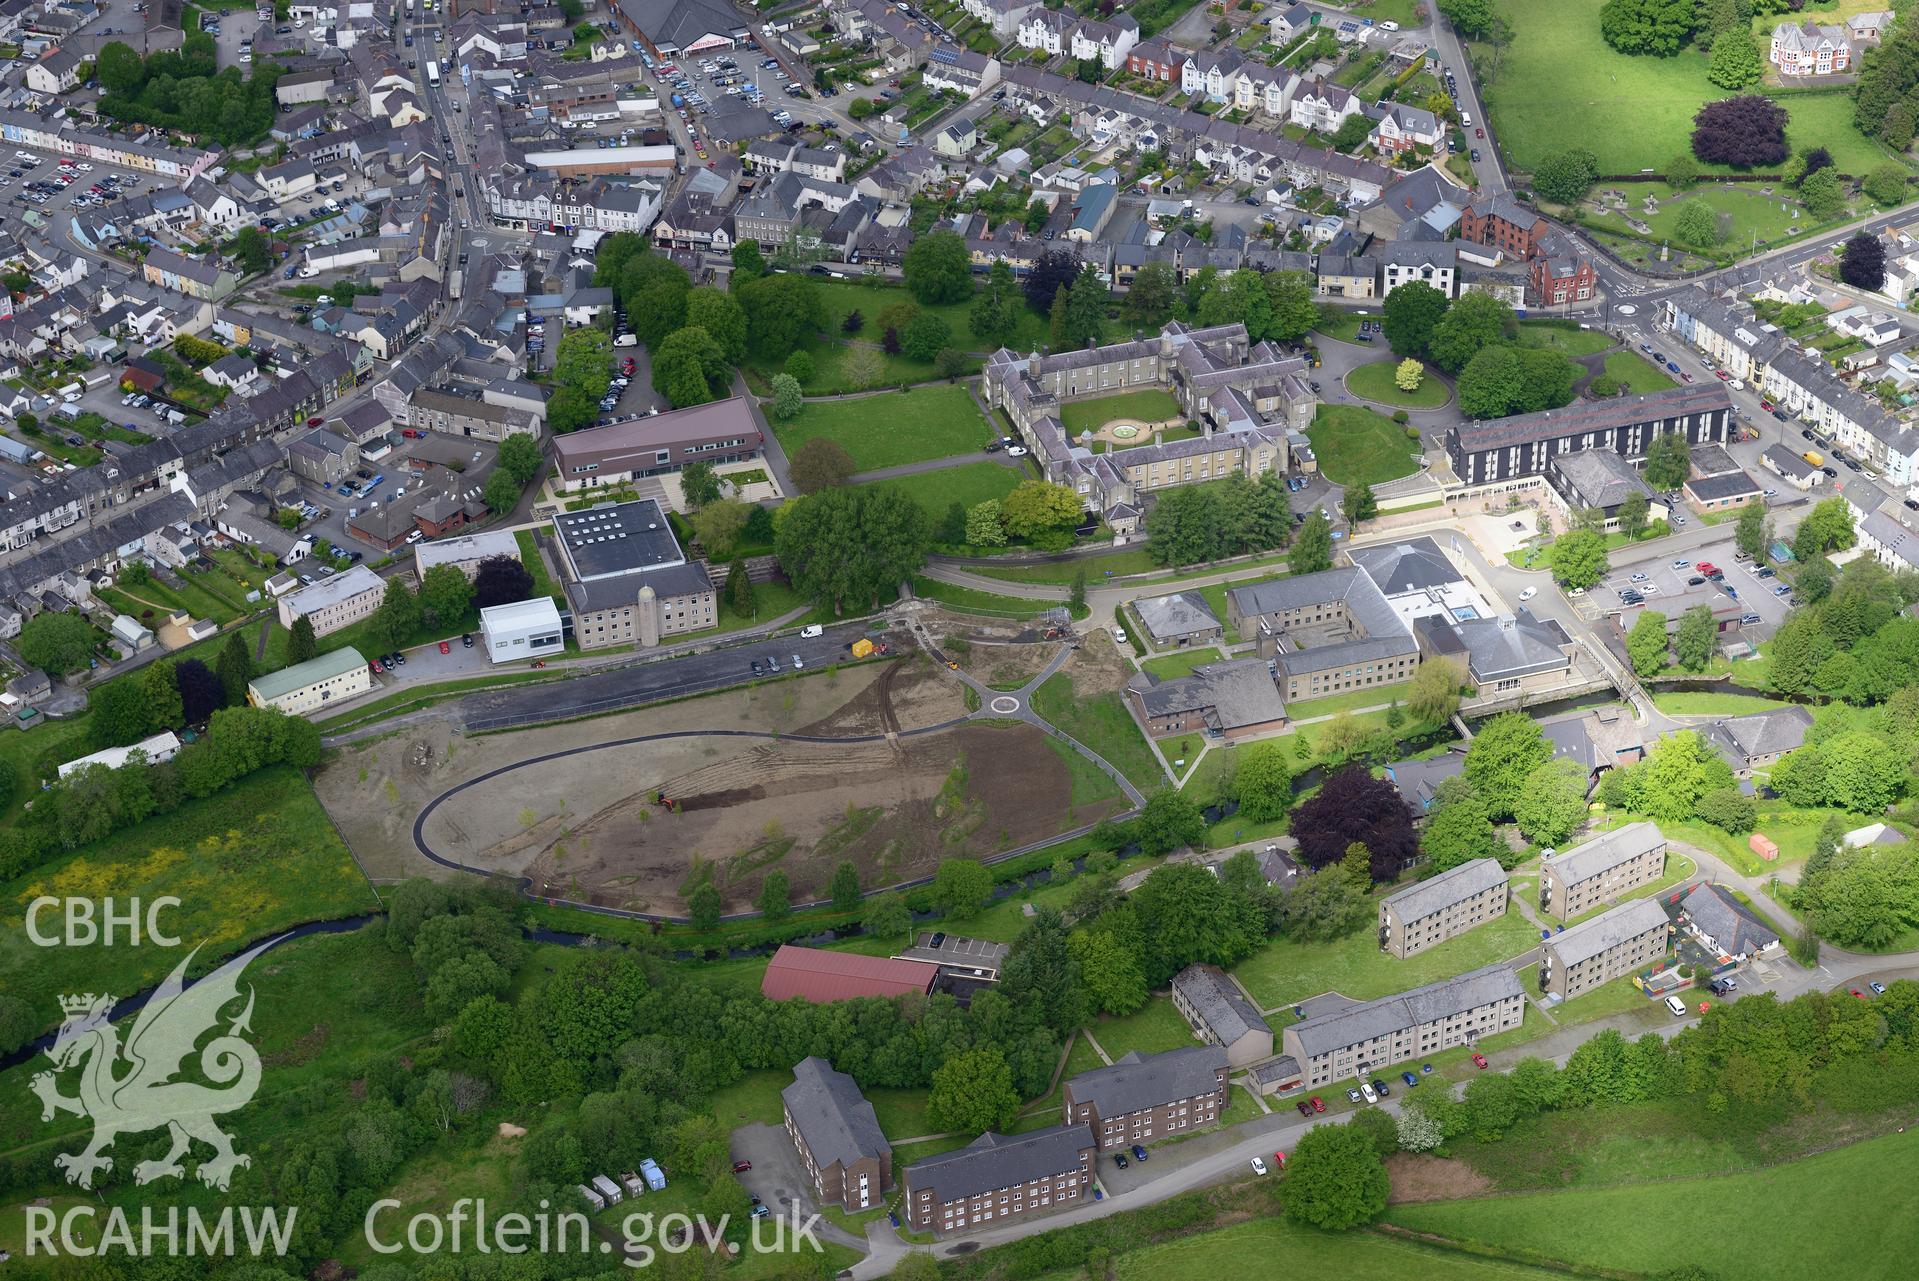 Stephen's castle, St David's college garden and the Roderic Bowen Library and Archives at Lampeter University. Oblique aerial photograph taken during the Royal Commission?s programme of archaeological aerial reconnaissance by Toby Driver on 3rd June 2015.